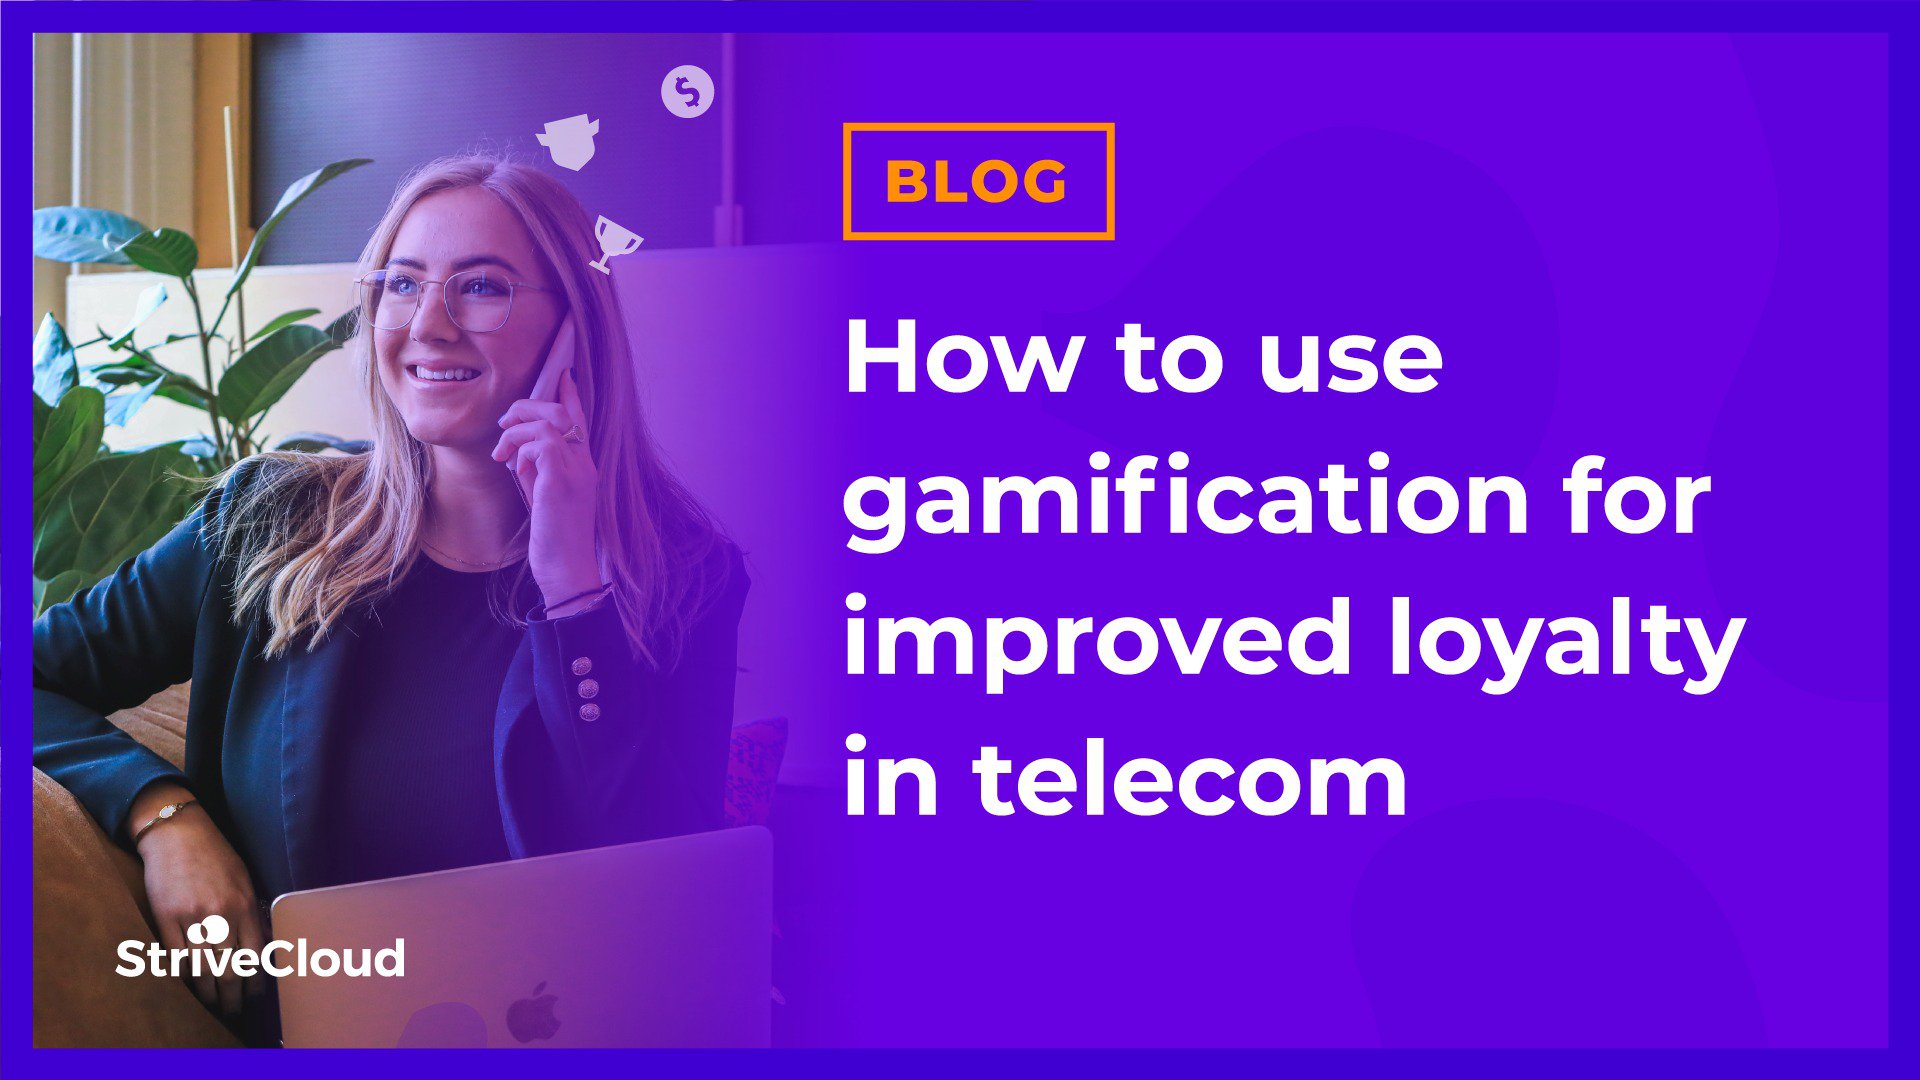 How to use gamification for improved loyalty in telecom